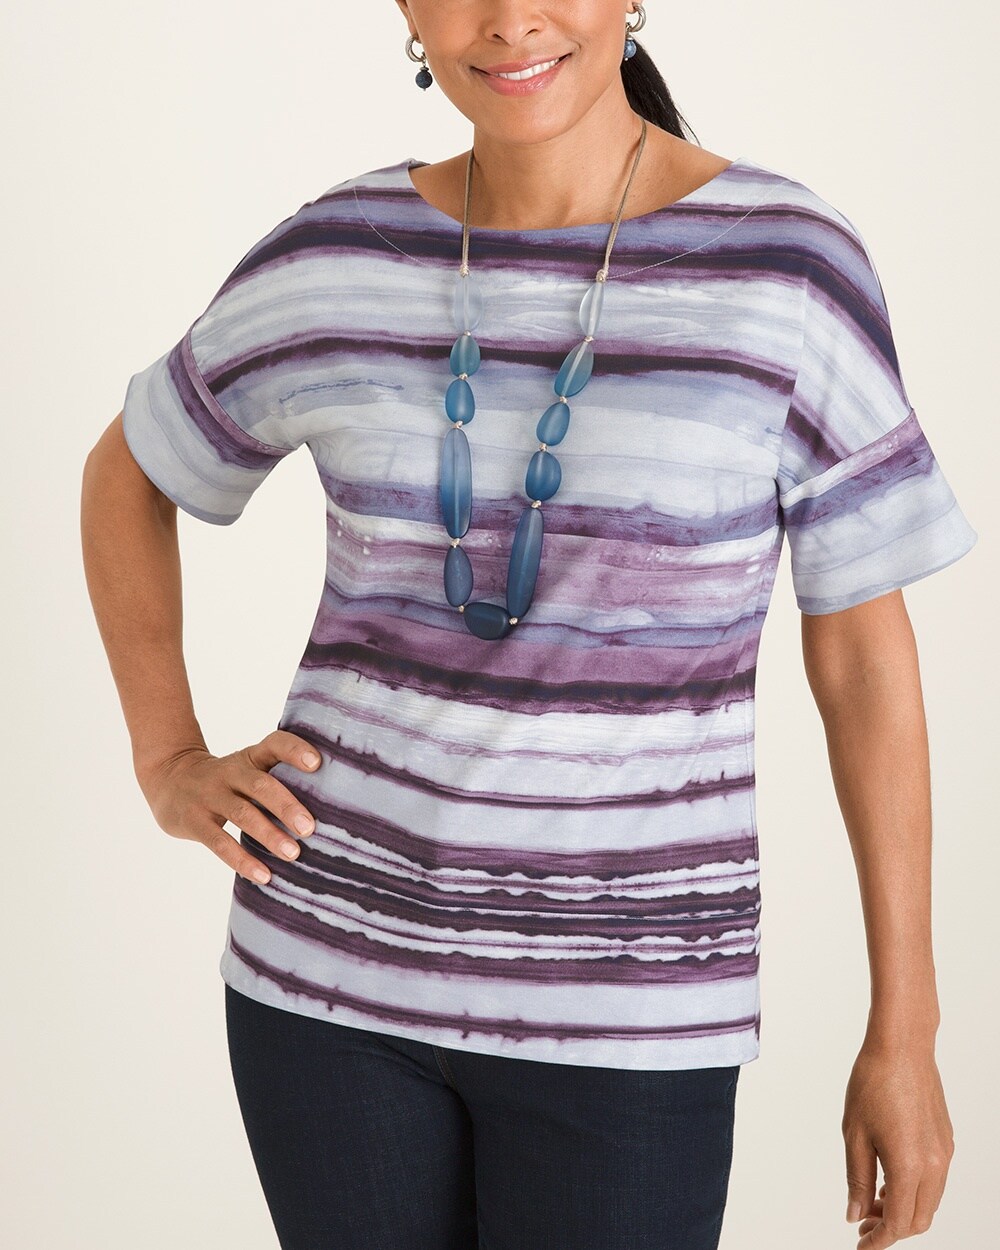 Cool-Toned Watercolor Striped Tee